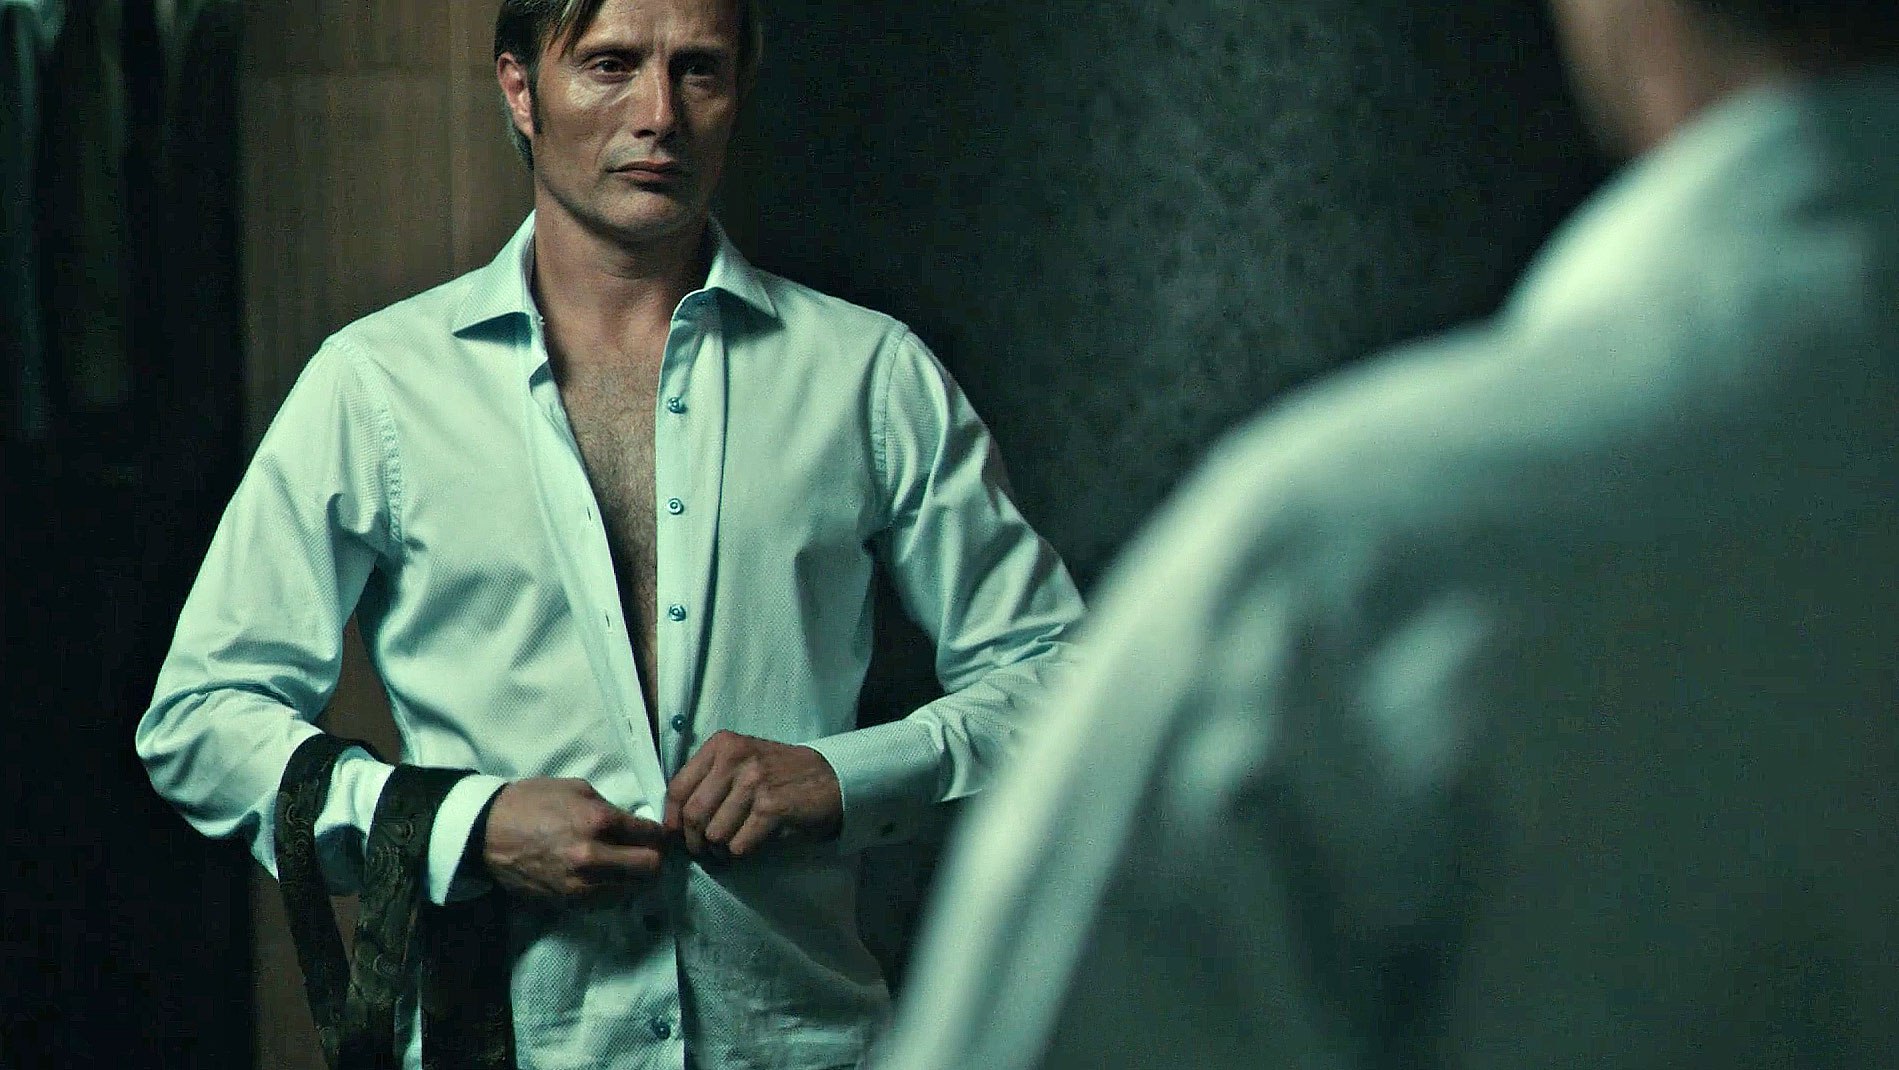 Hannibal doing up his shirt in the mirror